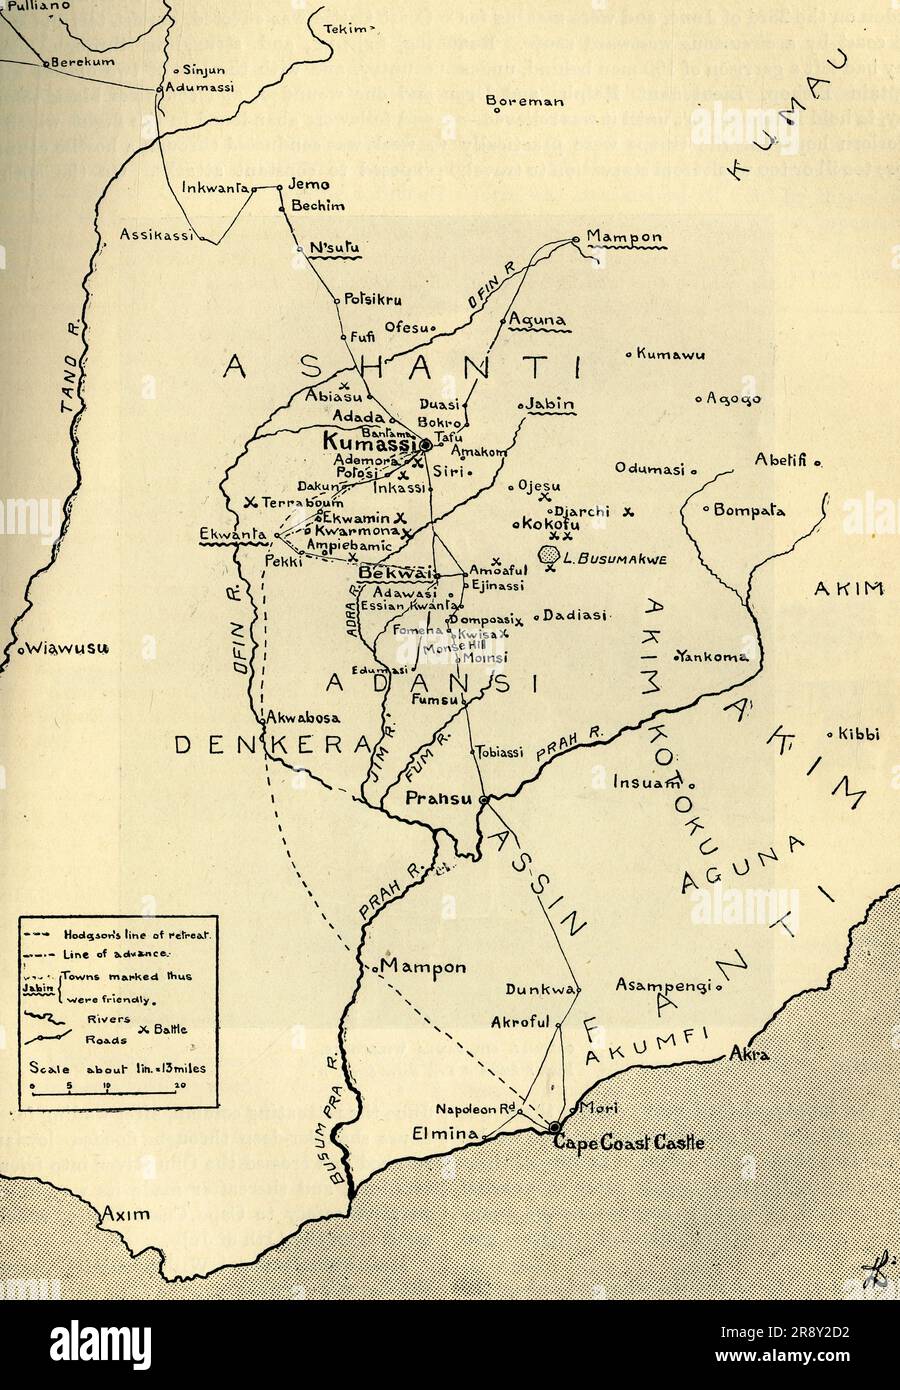 'Sketch Map of the Theatre of War in Ashanti, 1900', c1900. Showing Hodgson's line of retreat, line of advance, 'friendly' towns, rivers, roads and sites of battles. The Anglo-Ashanti wars were fought between the Ashanti Empire and the British Empire and its African allies in what became the Gold Coast, and later, Ghana. The British ultimately prevailed, resulting in the complete annexation of the Ashanti Empire by 1900. From &quot;Cassell's History of England, Vol. IX&quot;. [Cassell and Company, Limited, London, Paris, New York &amp; Melbourne] Stock Photo